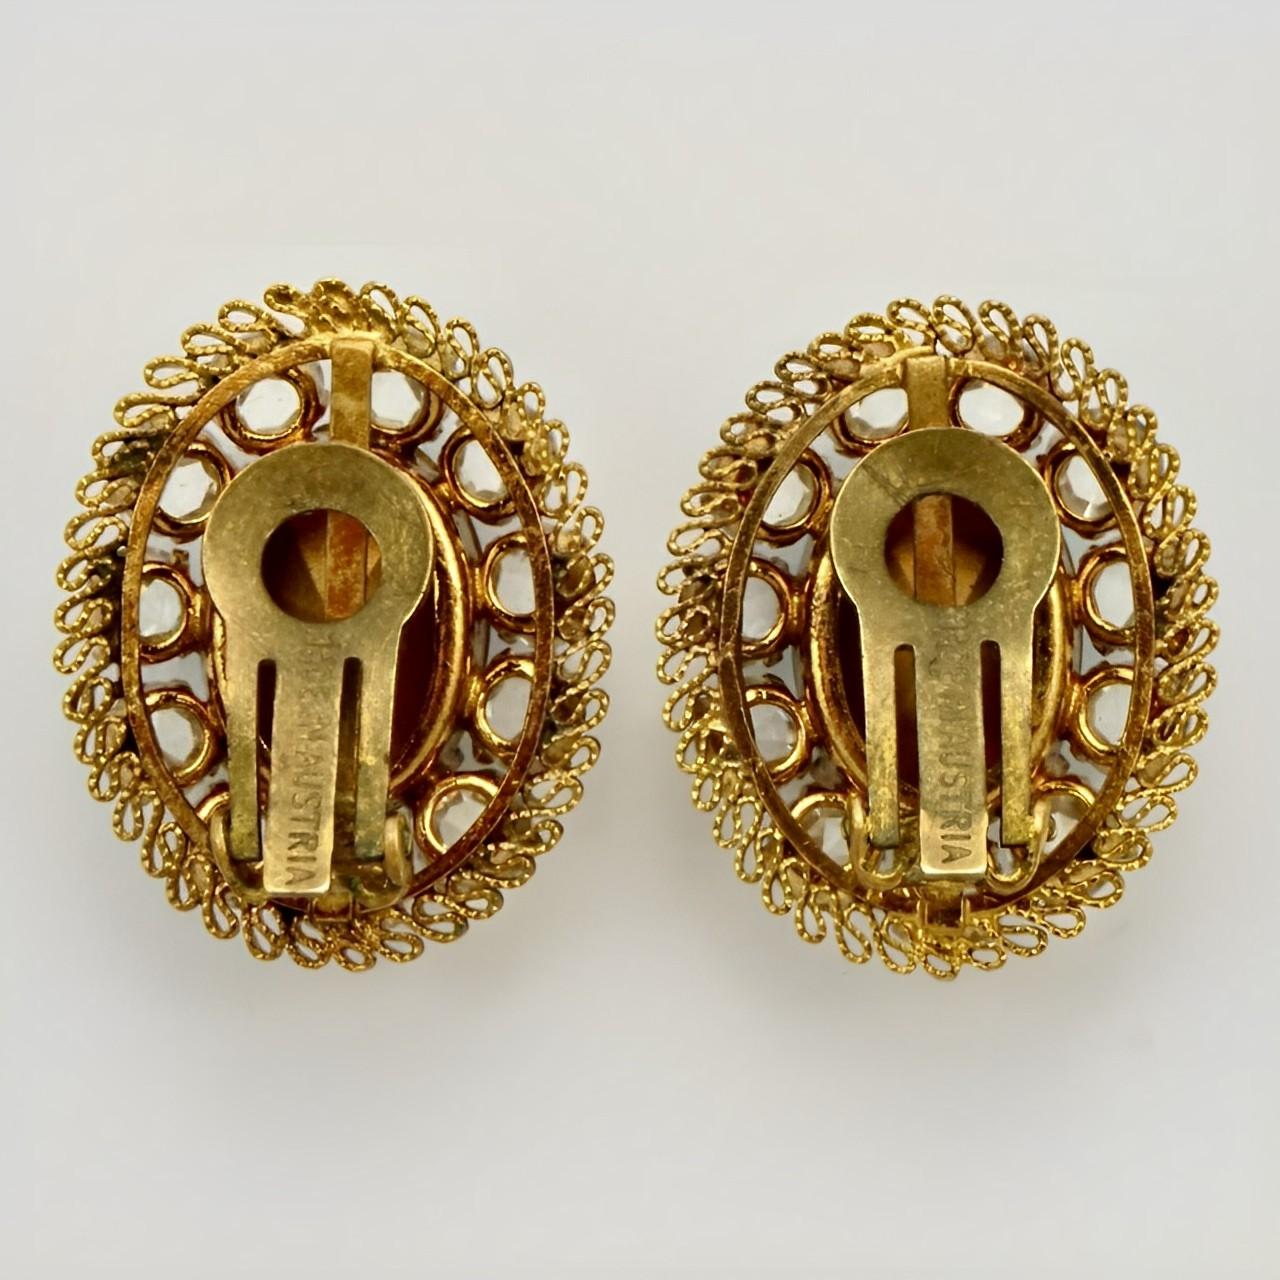 Austrian crystal gold plated oval clip on earrings. The beautiful crystals have a lovely filigree setting. Measuring length 3 cm / 1.1 inches by width 2.4 cm / .9 inch.
 
These are stylish and elegant earrings with sparkling clear crystals. Circa